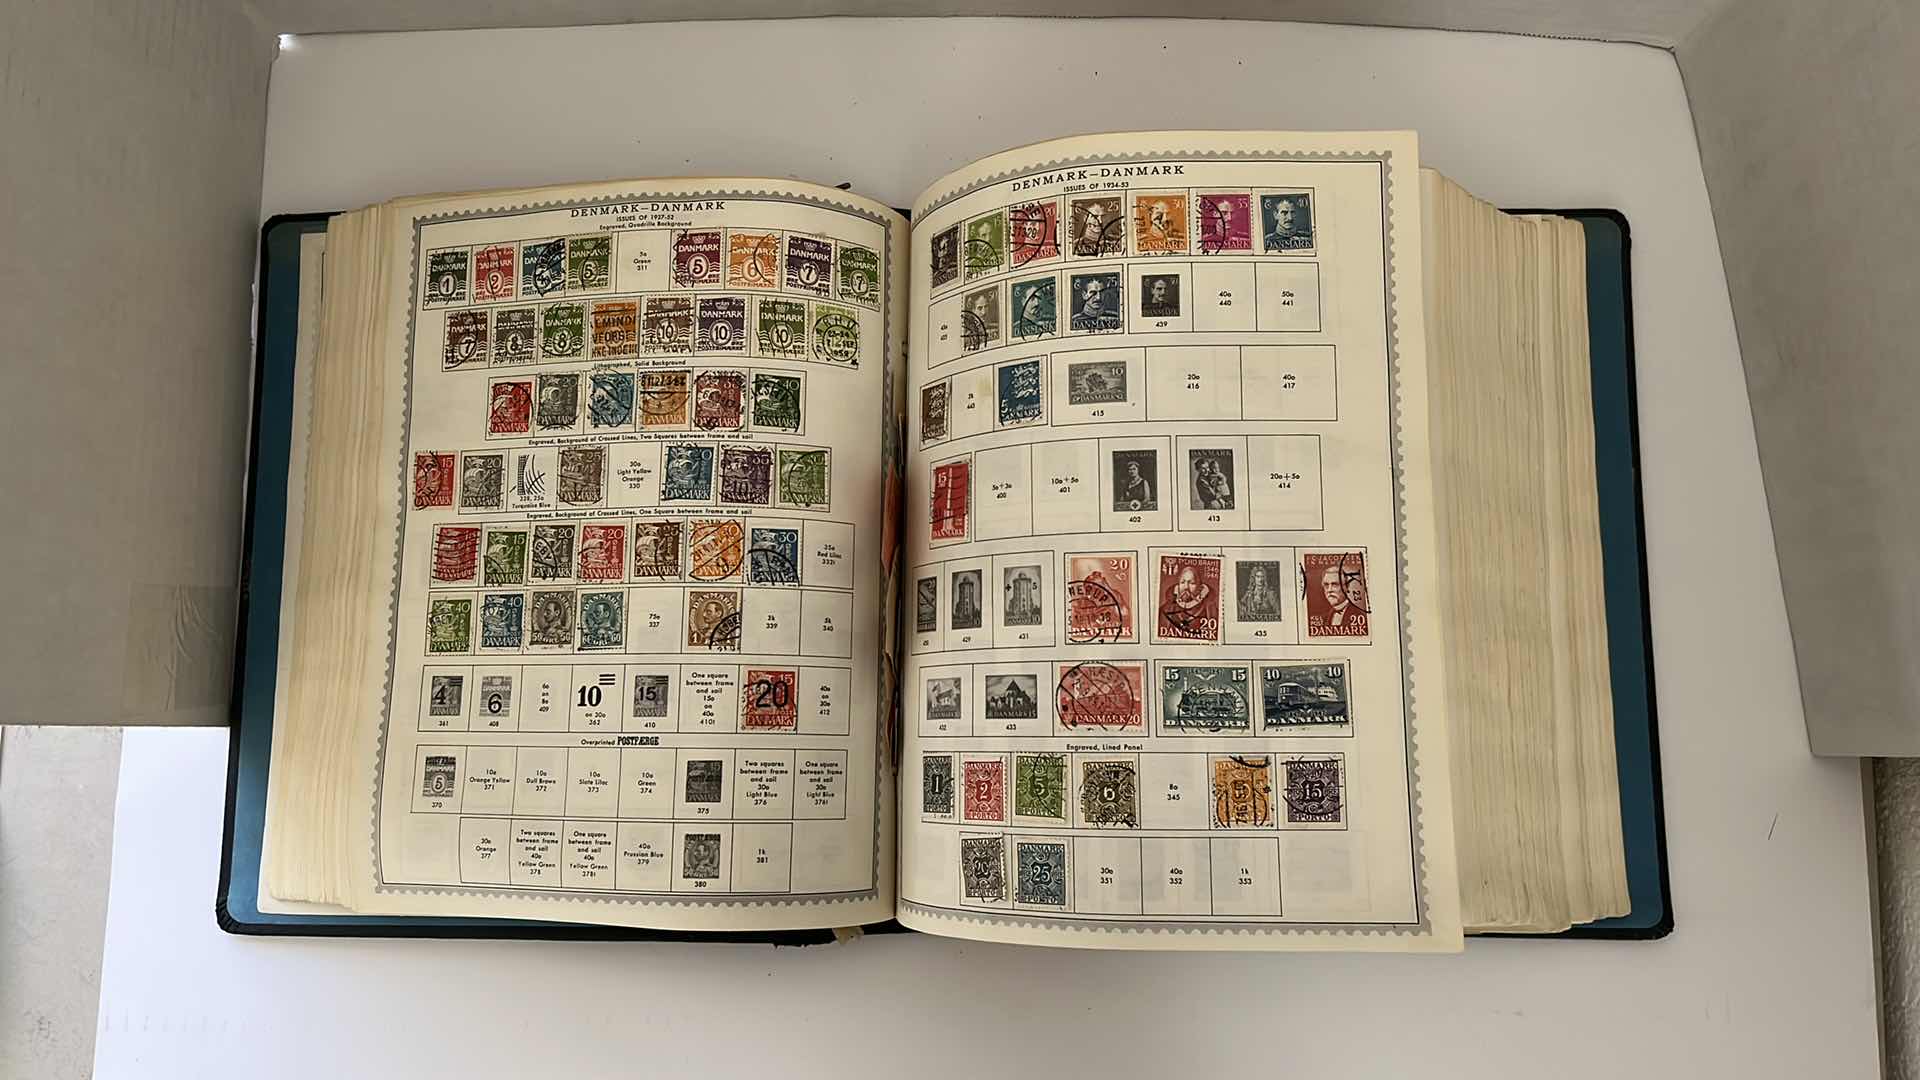 Photo 6 of GLOBAL STAMP ALBUM CONTAINING VINTAGE STAMPS